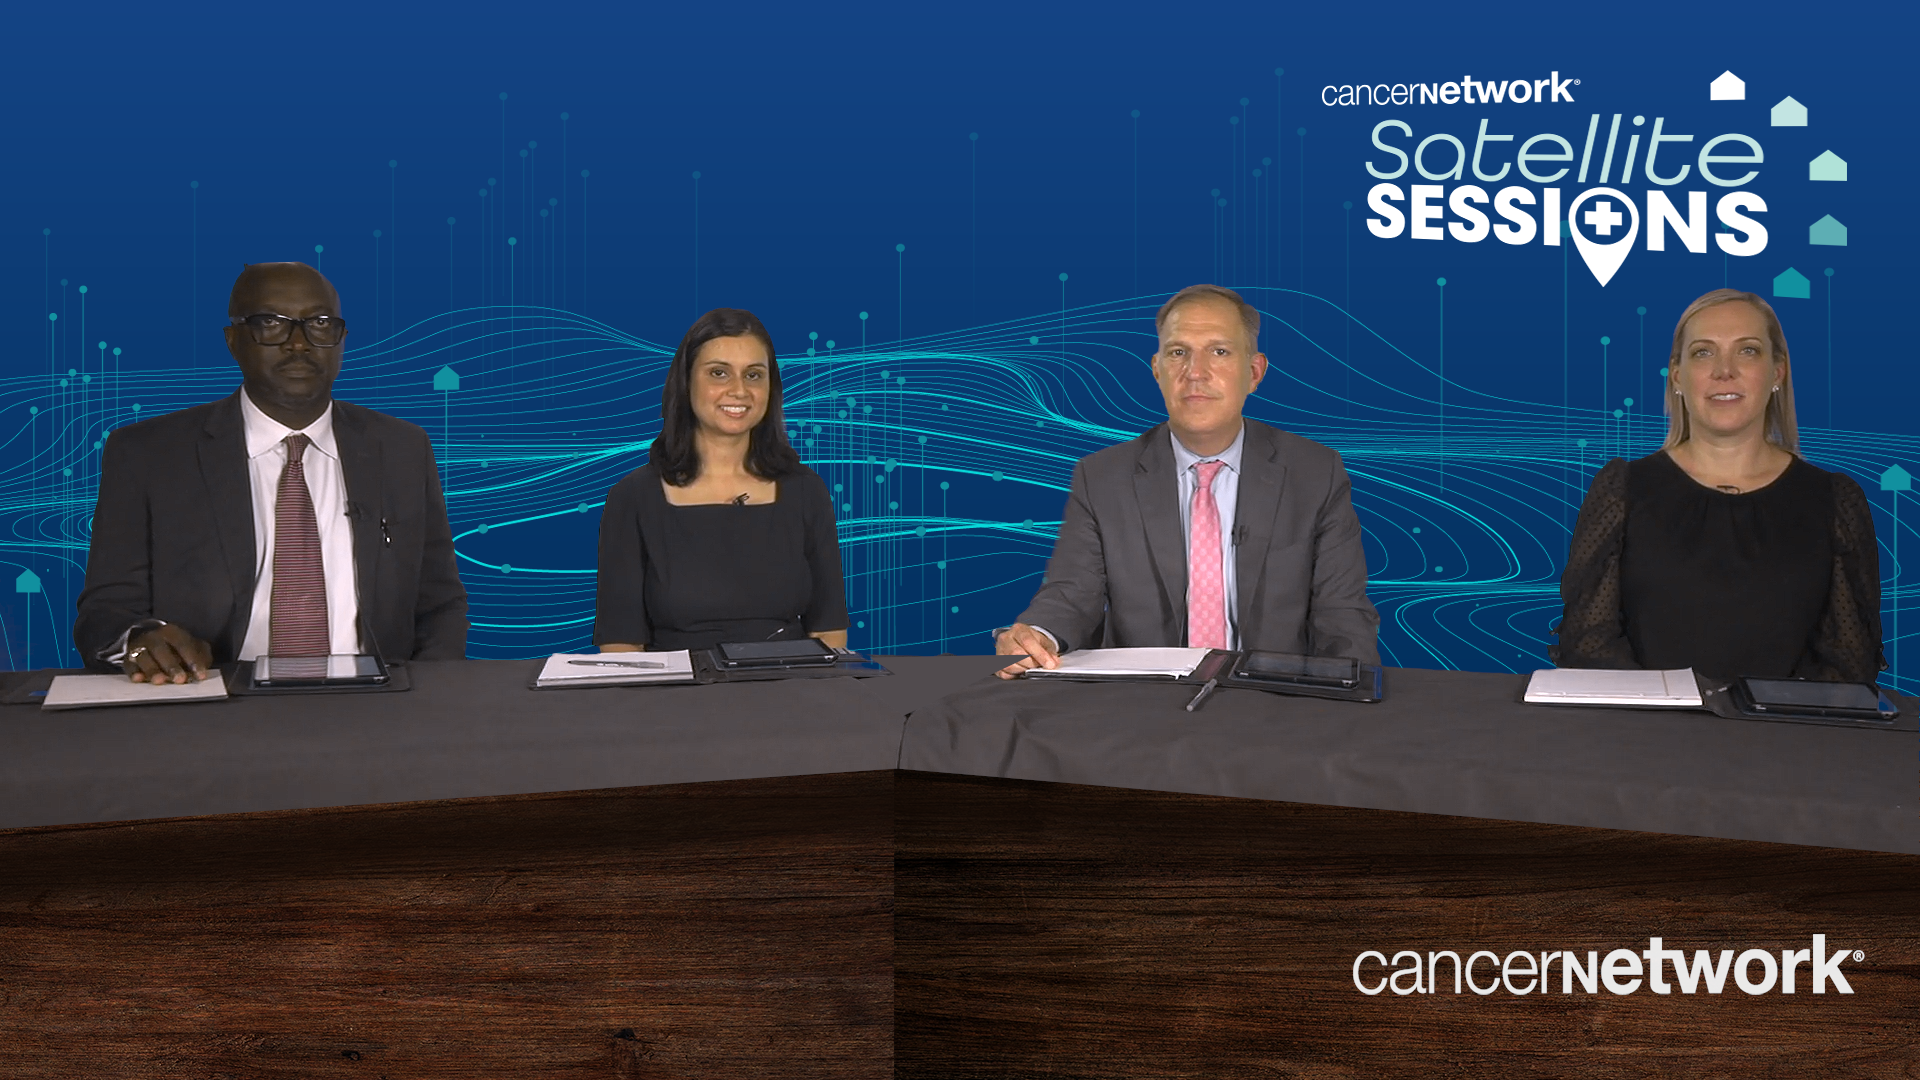 A panel of 4 experts on multiple myeloma seated at a long table